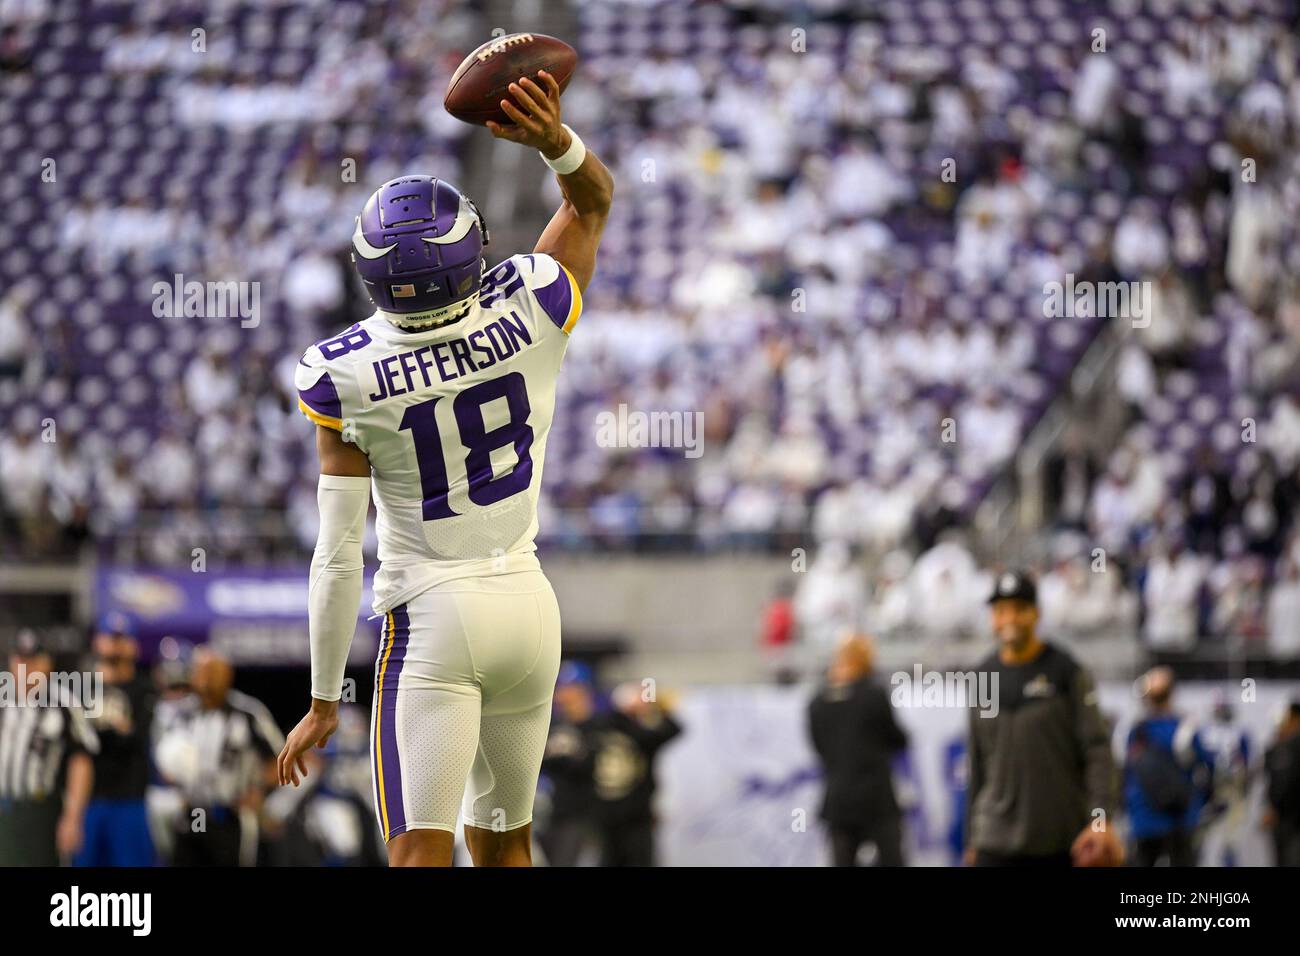 MINNEAPOLIS, MN - DECEMBER 24: Minnesota Vikings wide receiver Justin  Jefferson (18) warms up before before a game between the Minnesota Vikings  and New York Giants on December 24, 2022, at U.S.